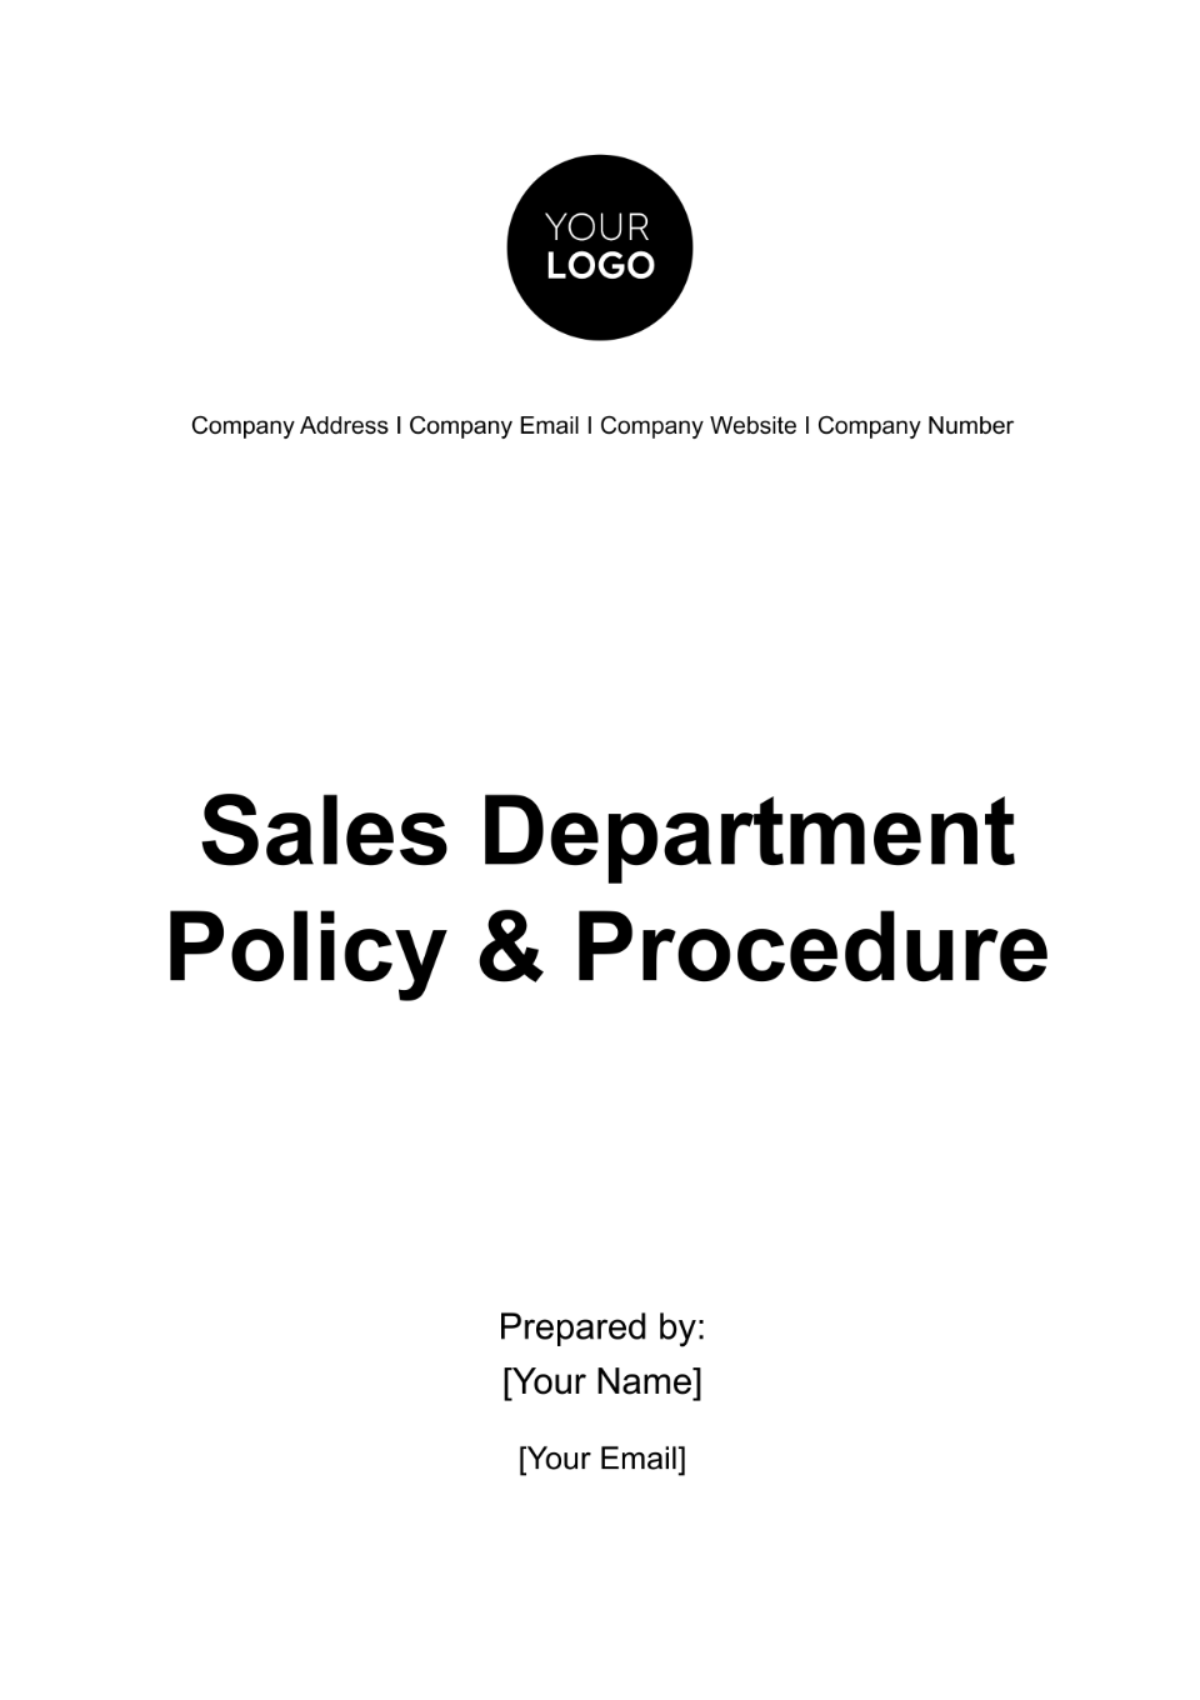 Free Sales Department Policy & Procedure Template